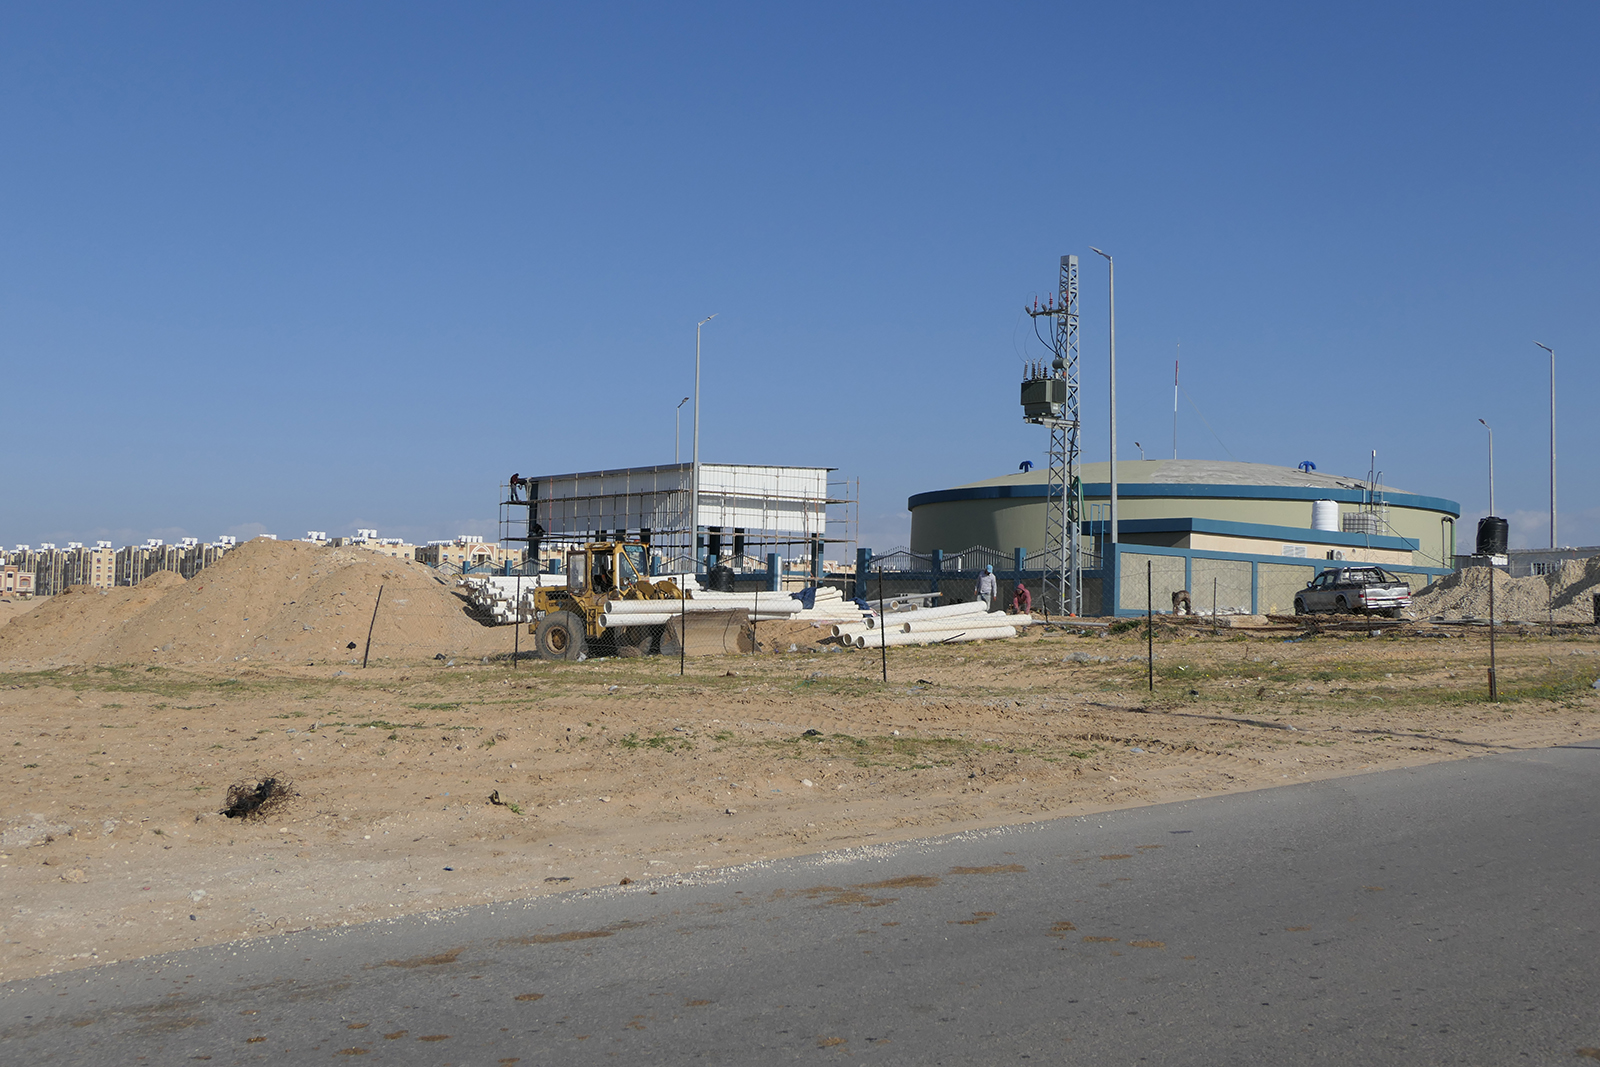 Water pumping station serving 50,000 Palestinian residents in Khan Younis. March, 2019. Photo by OCHA